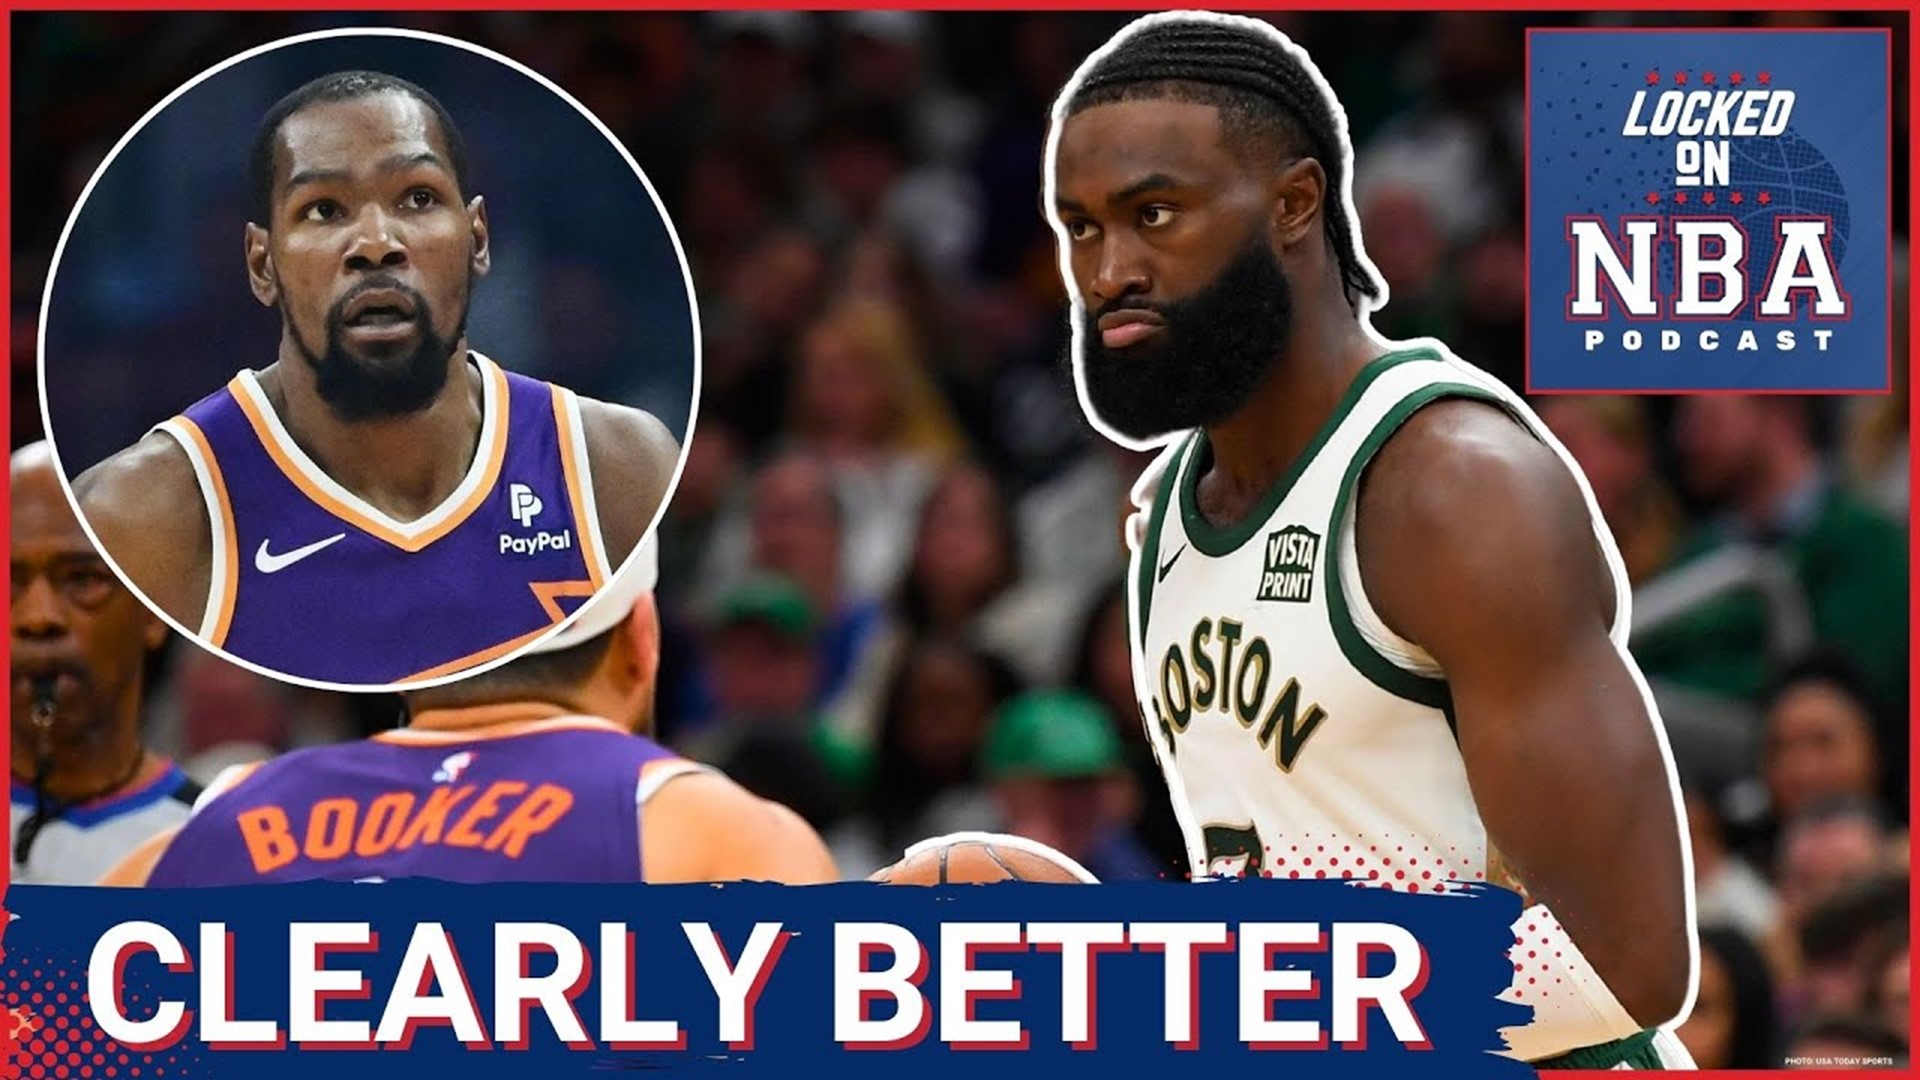 The Boston Celtics made 25 3-pointers and dominated the Phoenix Suns. How far are the Suns from being legitimate contenders?